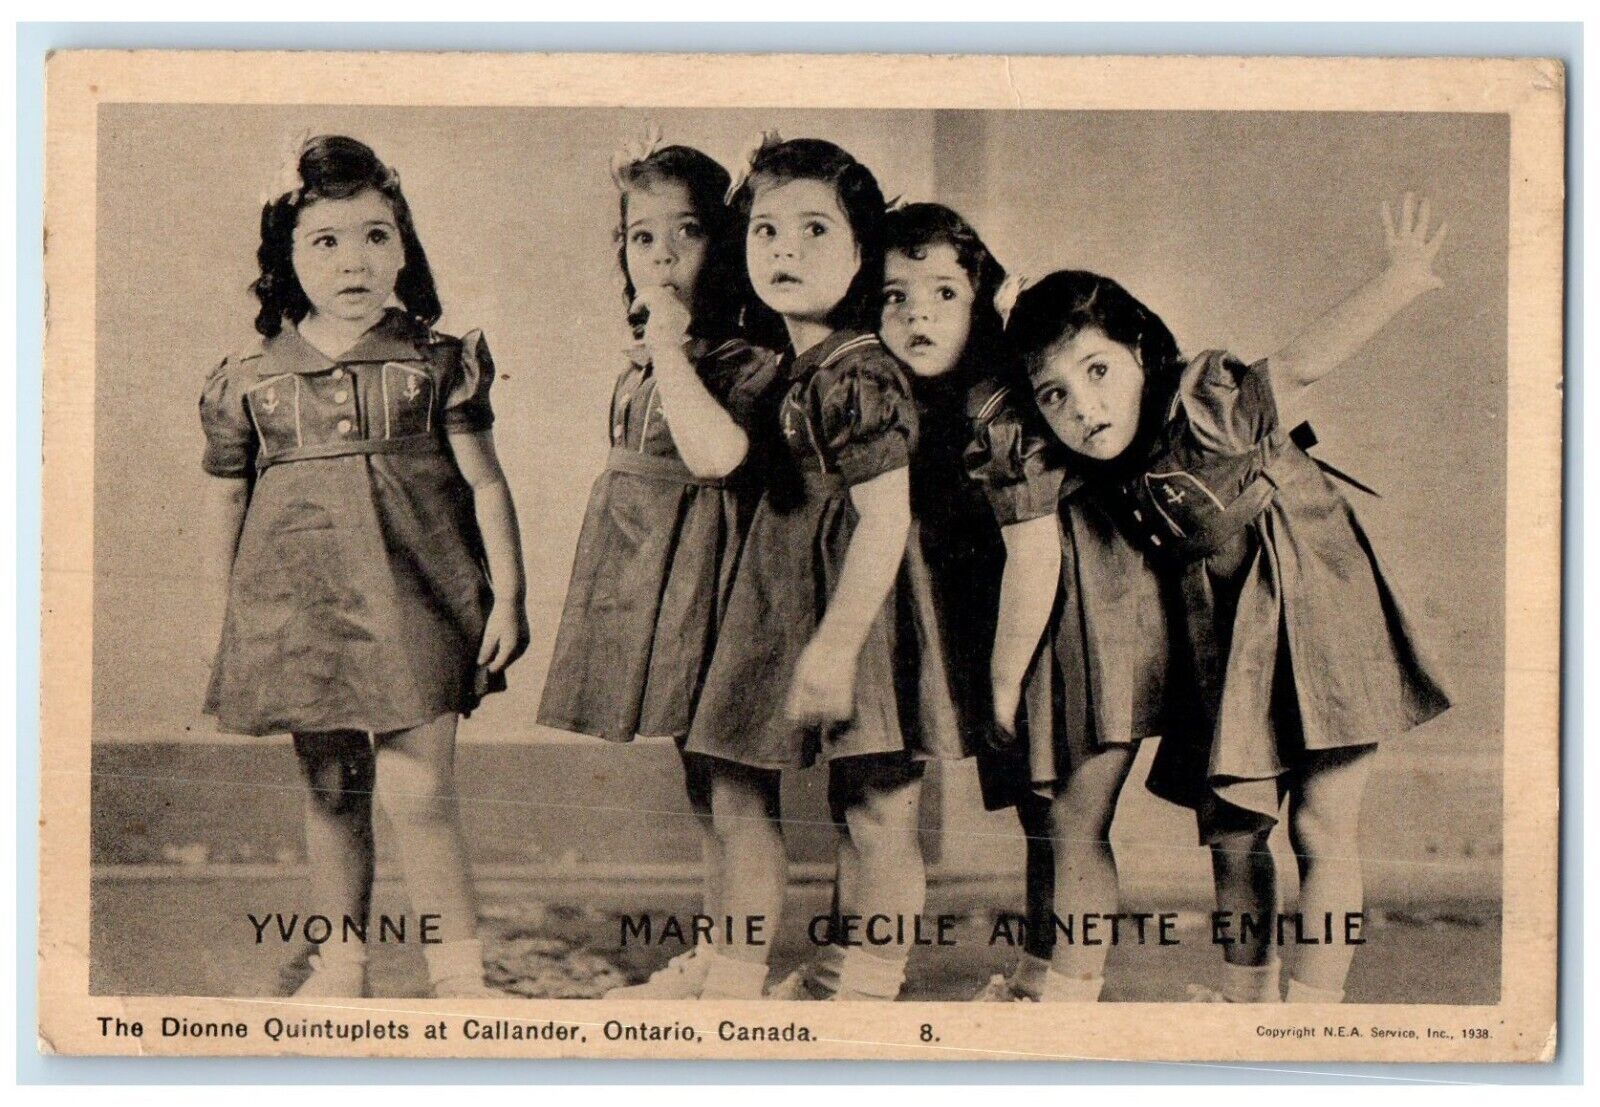 1938 The Dionne Quintuplets At Callander Ontario Canada Posted Vintage Postcard